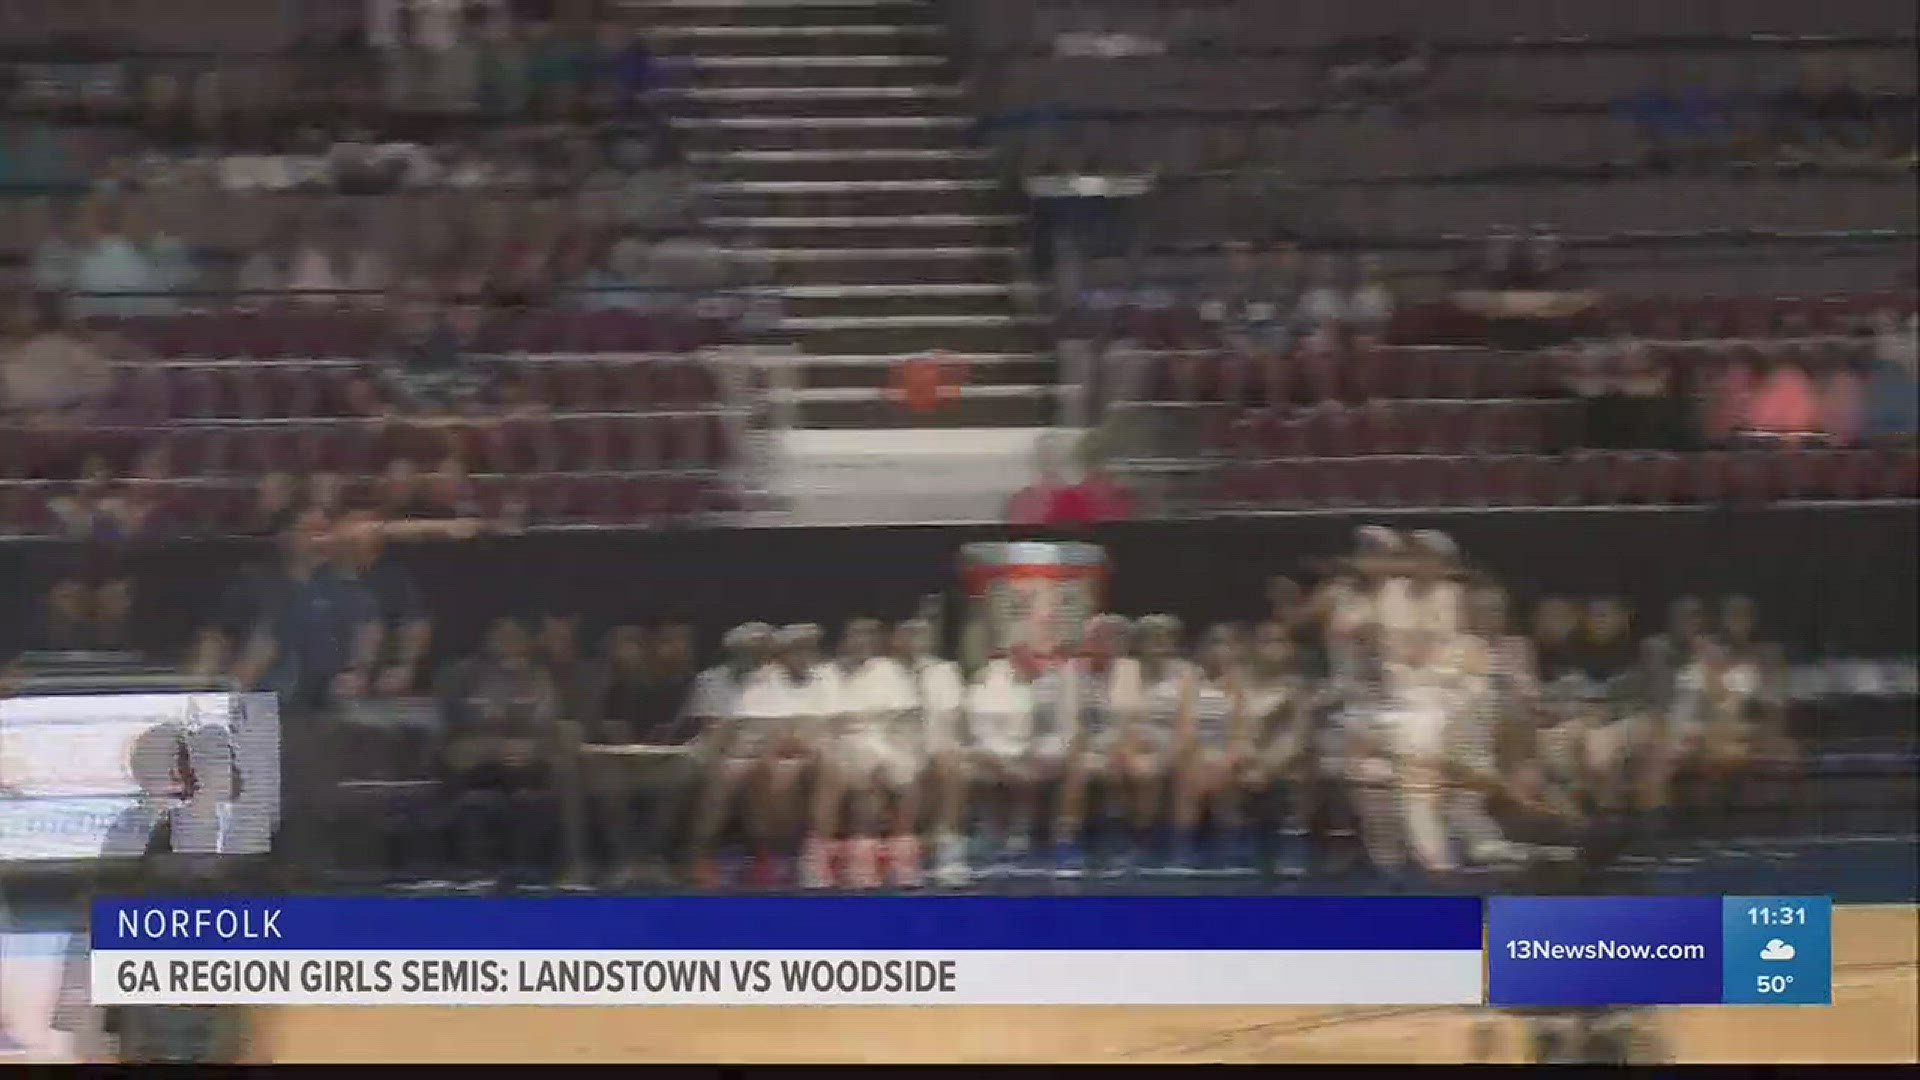 The Eagles had enough to beat Woodside 60-42. They'll qualified for their third straight state tournament berth. The Dolphins got 17 points from Kayla McMakin as they beat Grassfield 58-47.